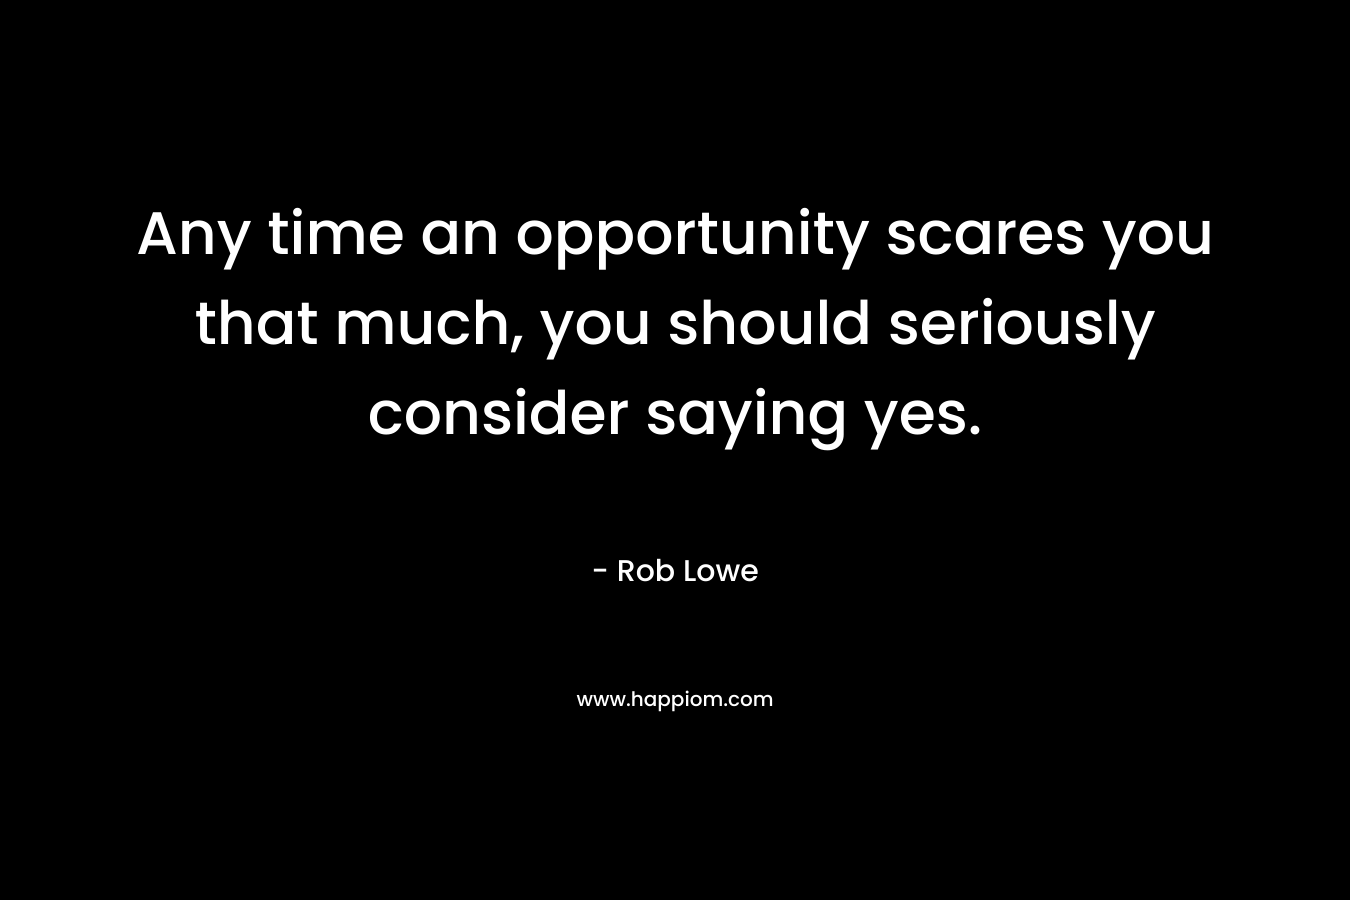 Any time an opportunity scares you that much, you should seriously consider saying yes. – Rob Lowe